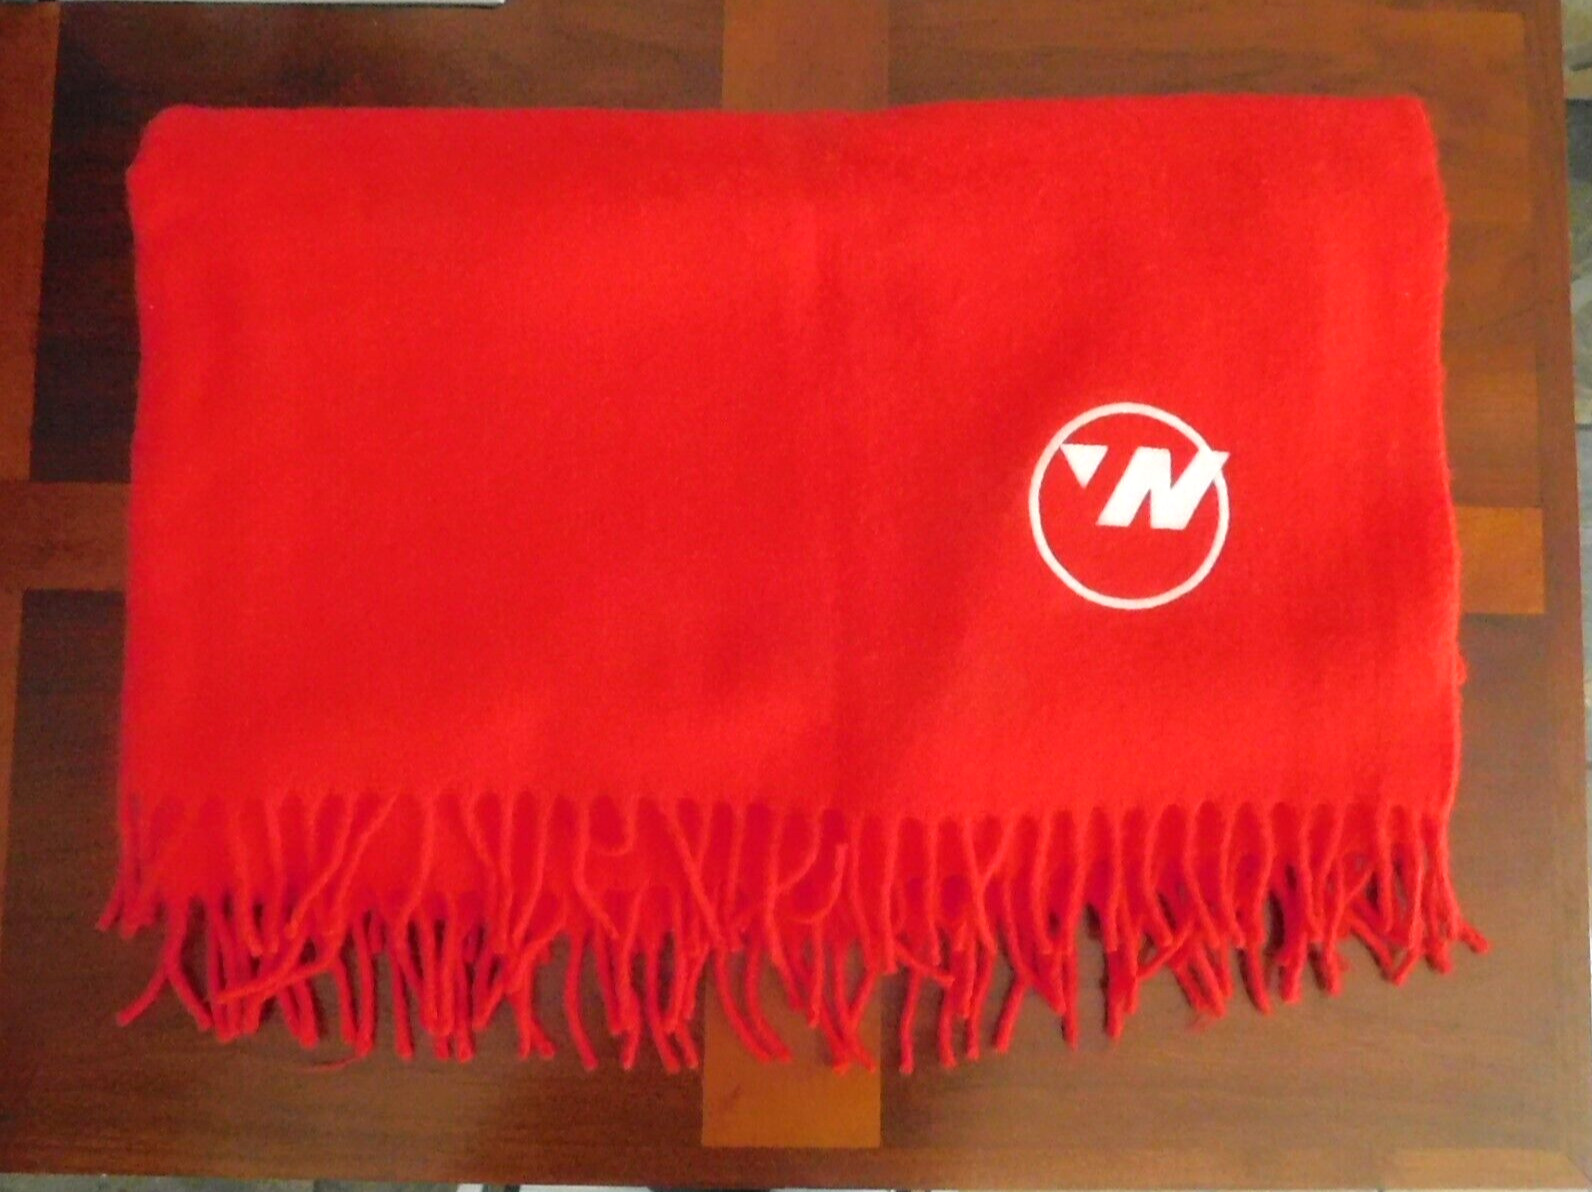 VTG. 1980's NORTHWEST AIRLINES RED WOOL THROW / EMBROIDERED LOGO from 1st CLASS